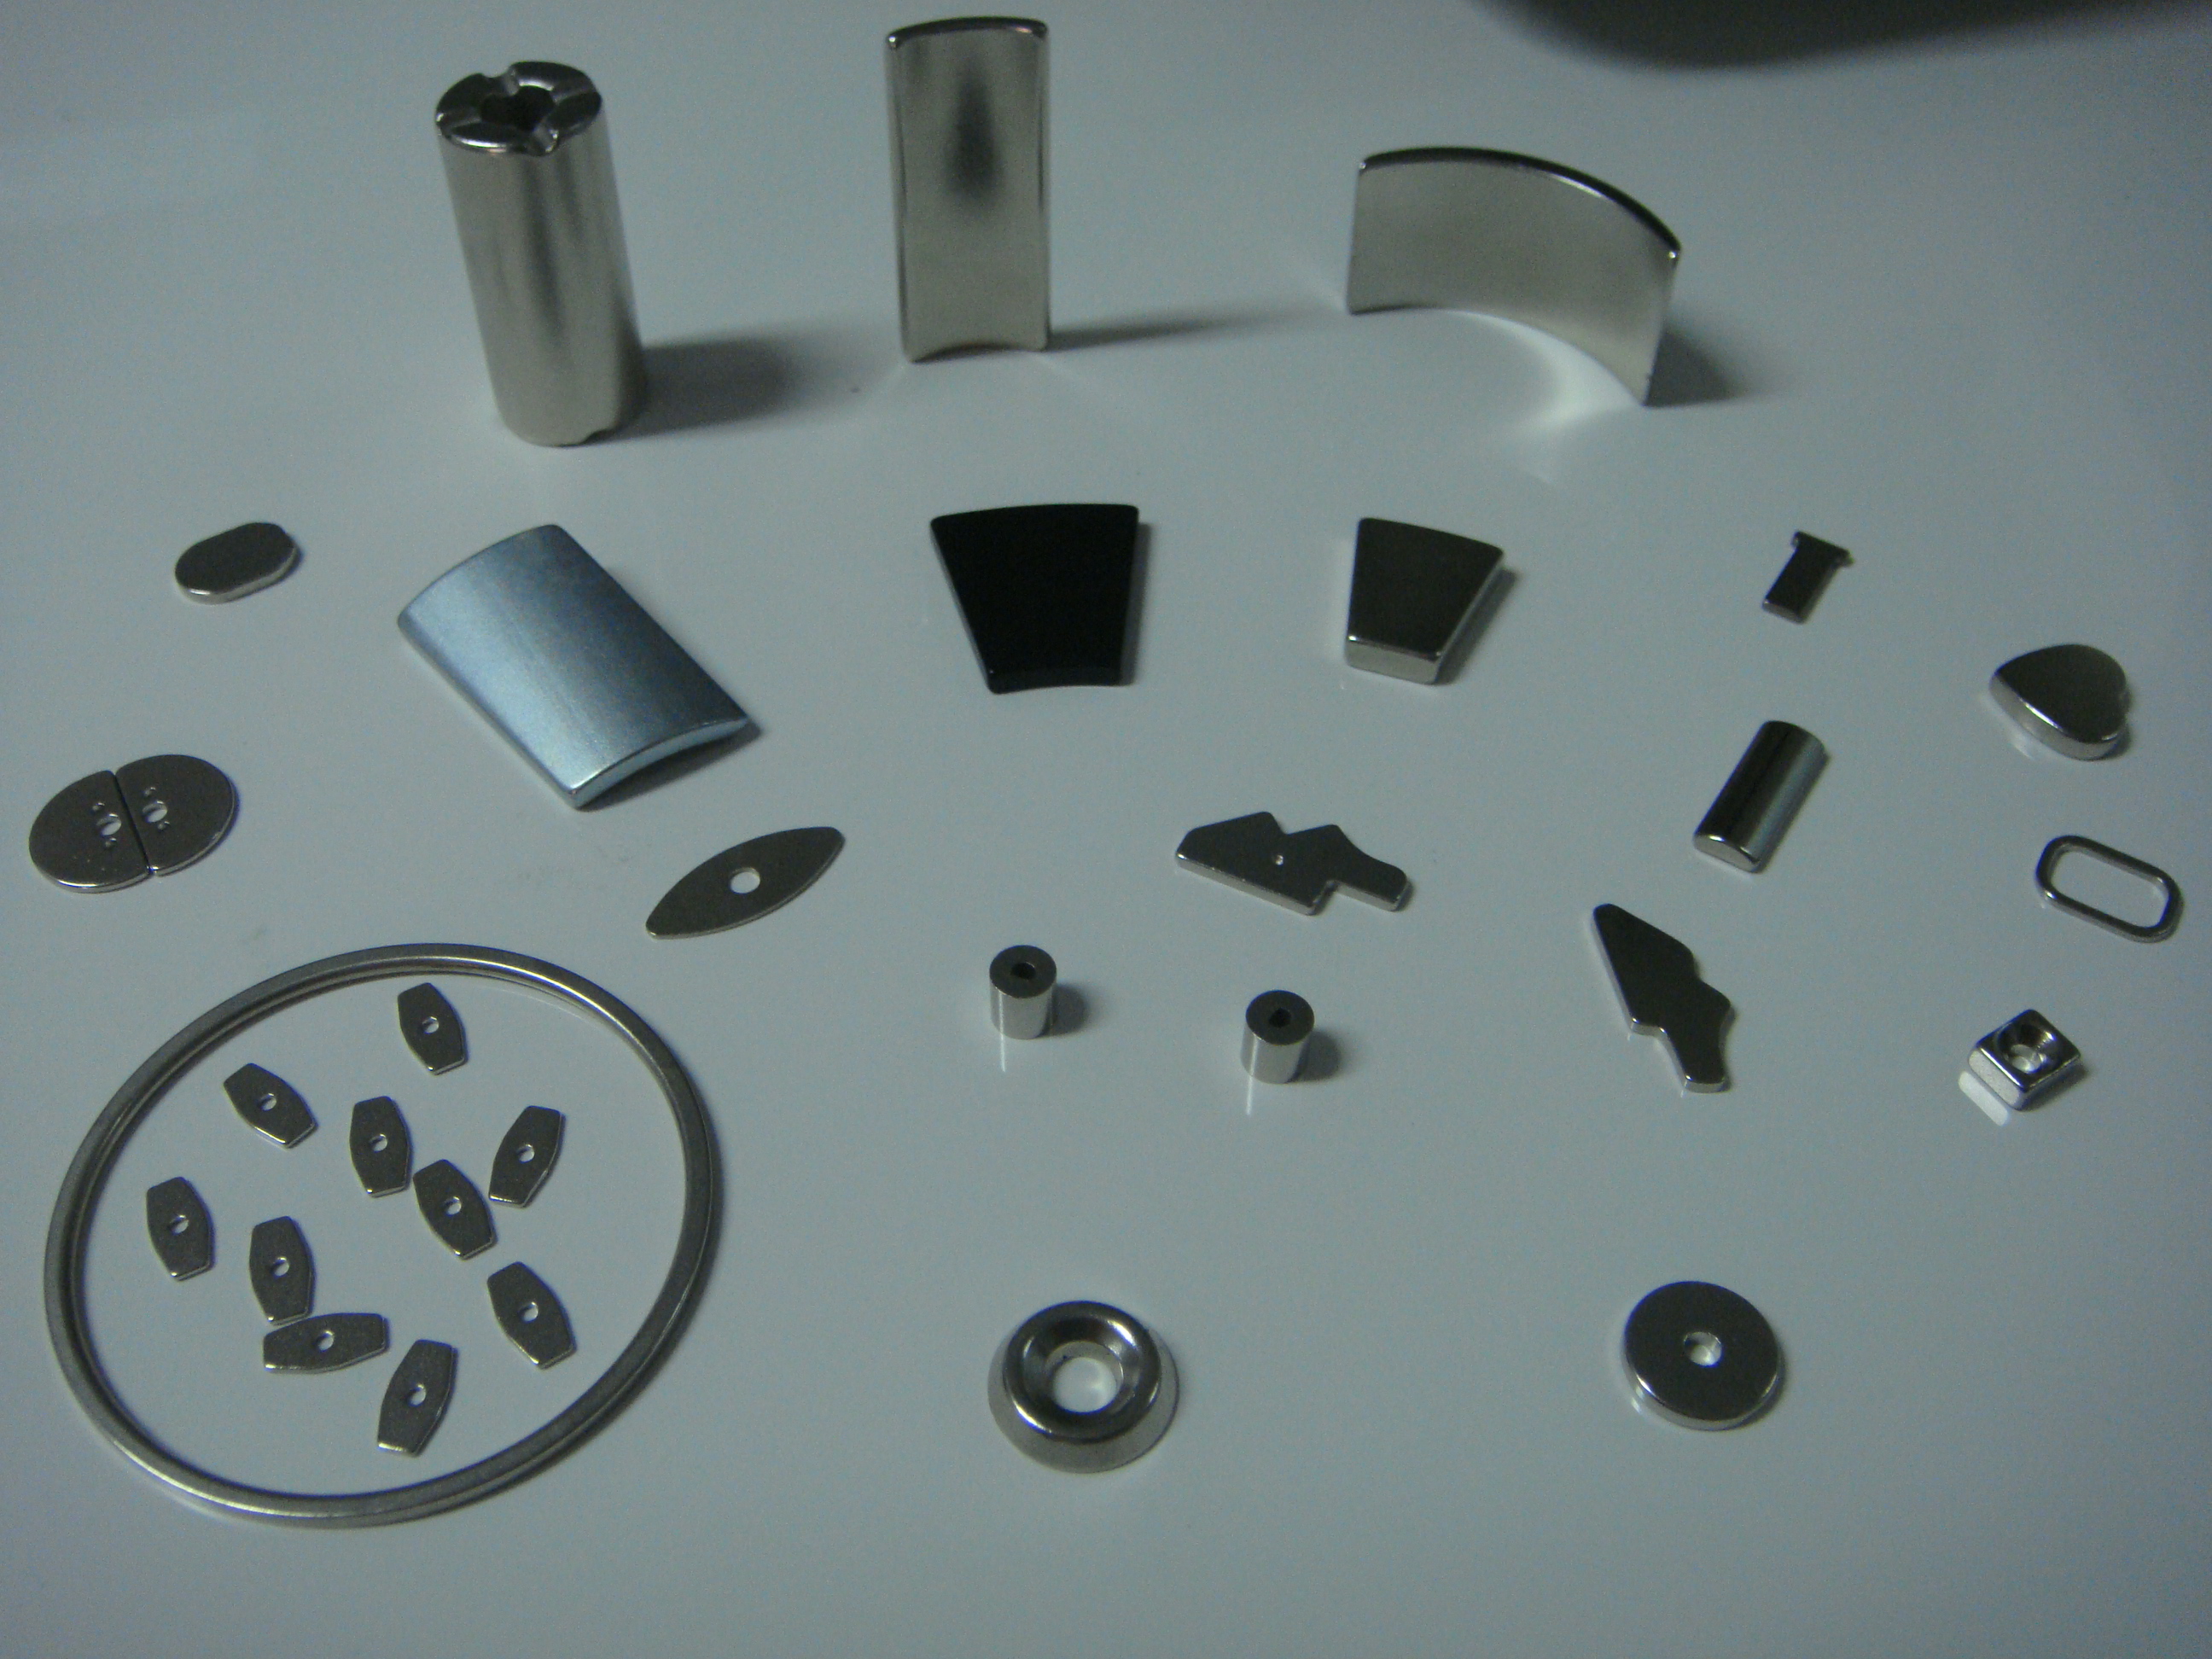 Sintered Ndfeb Magnets - The Strongest Rare Earth Magnets